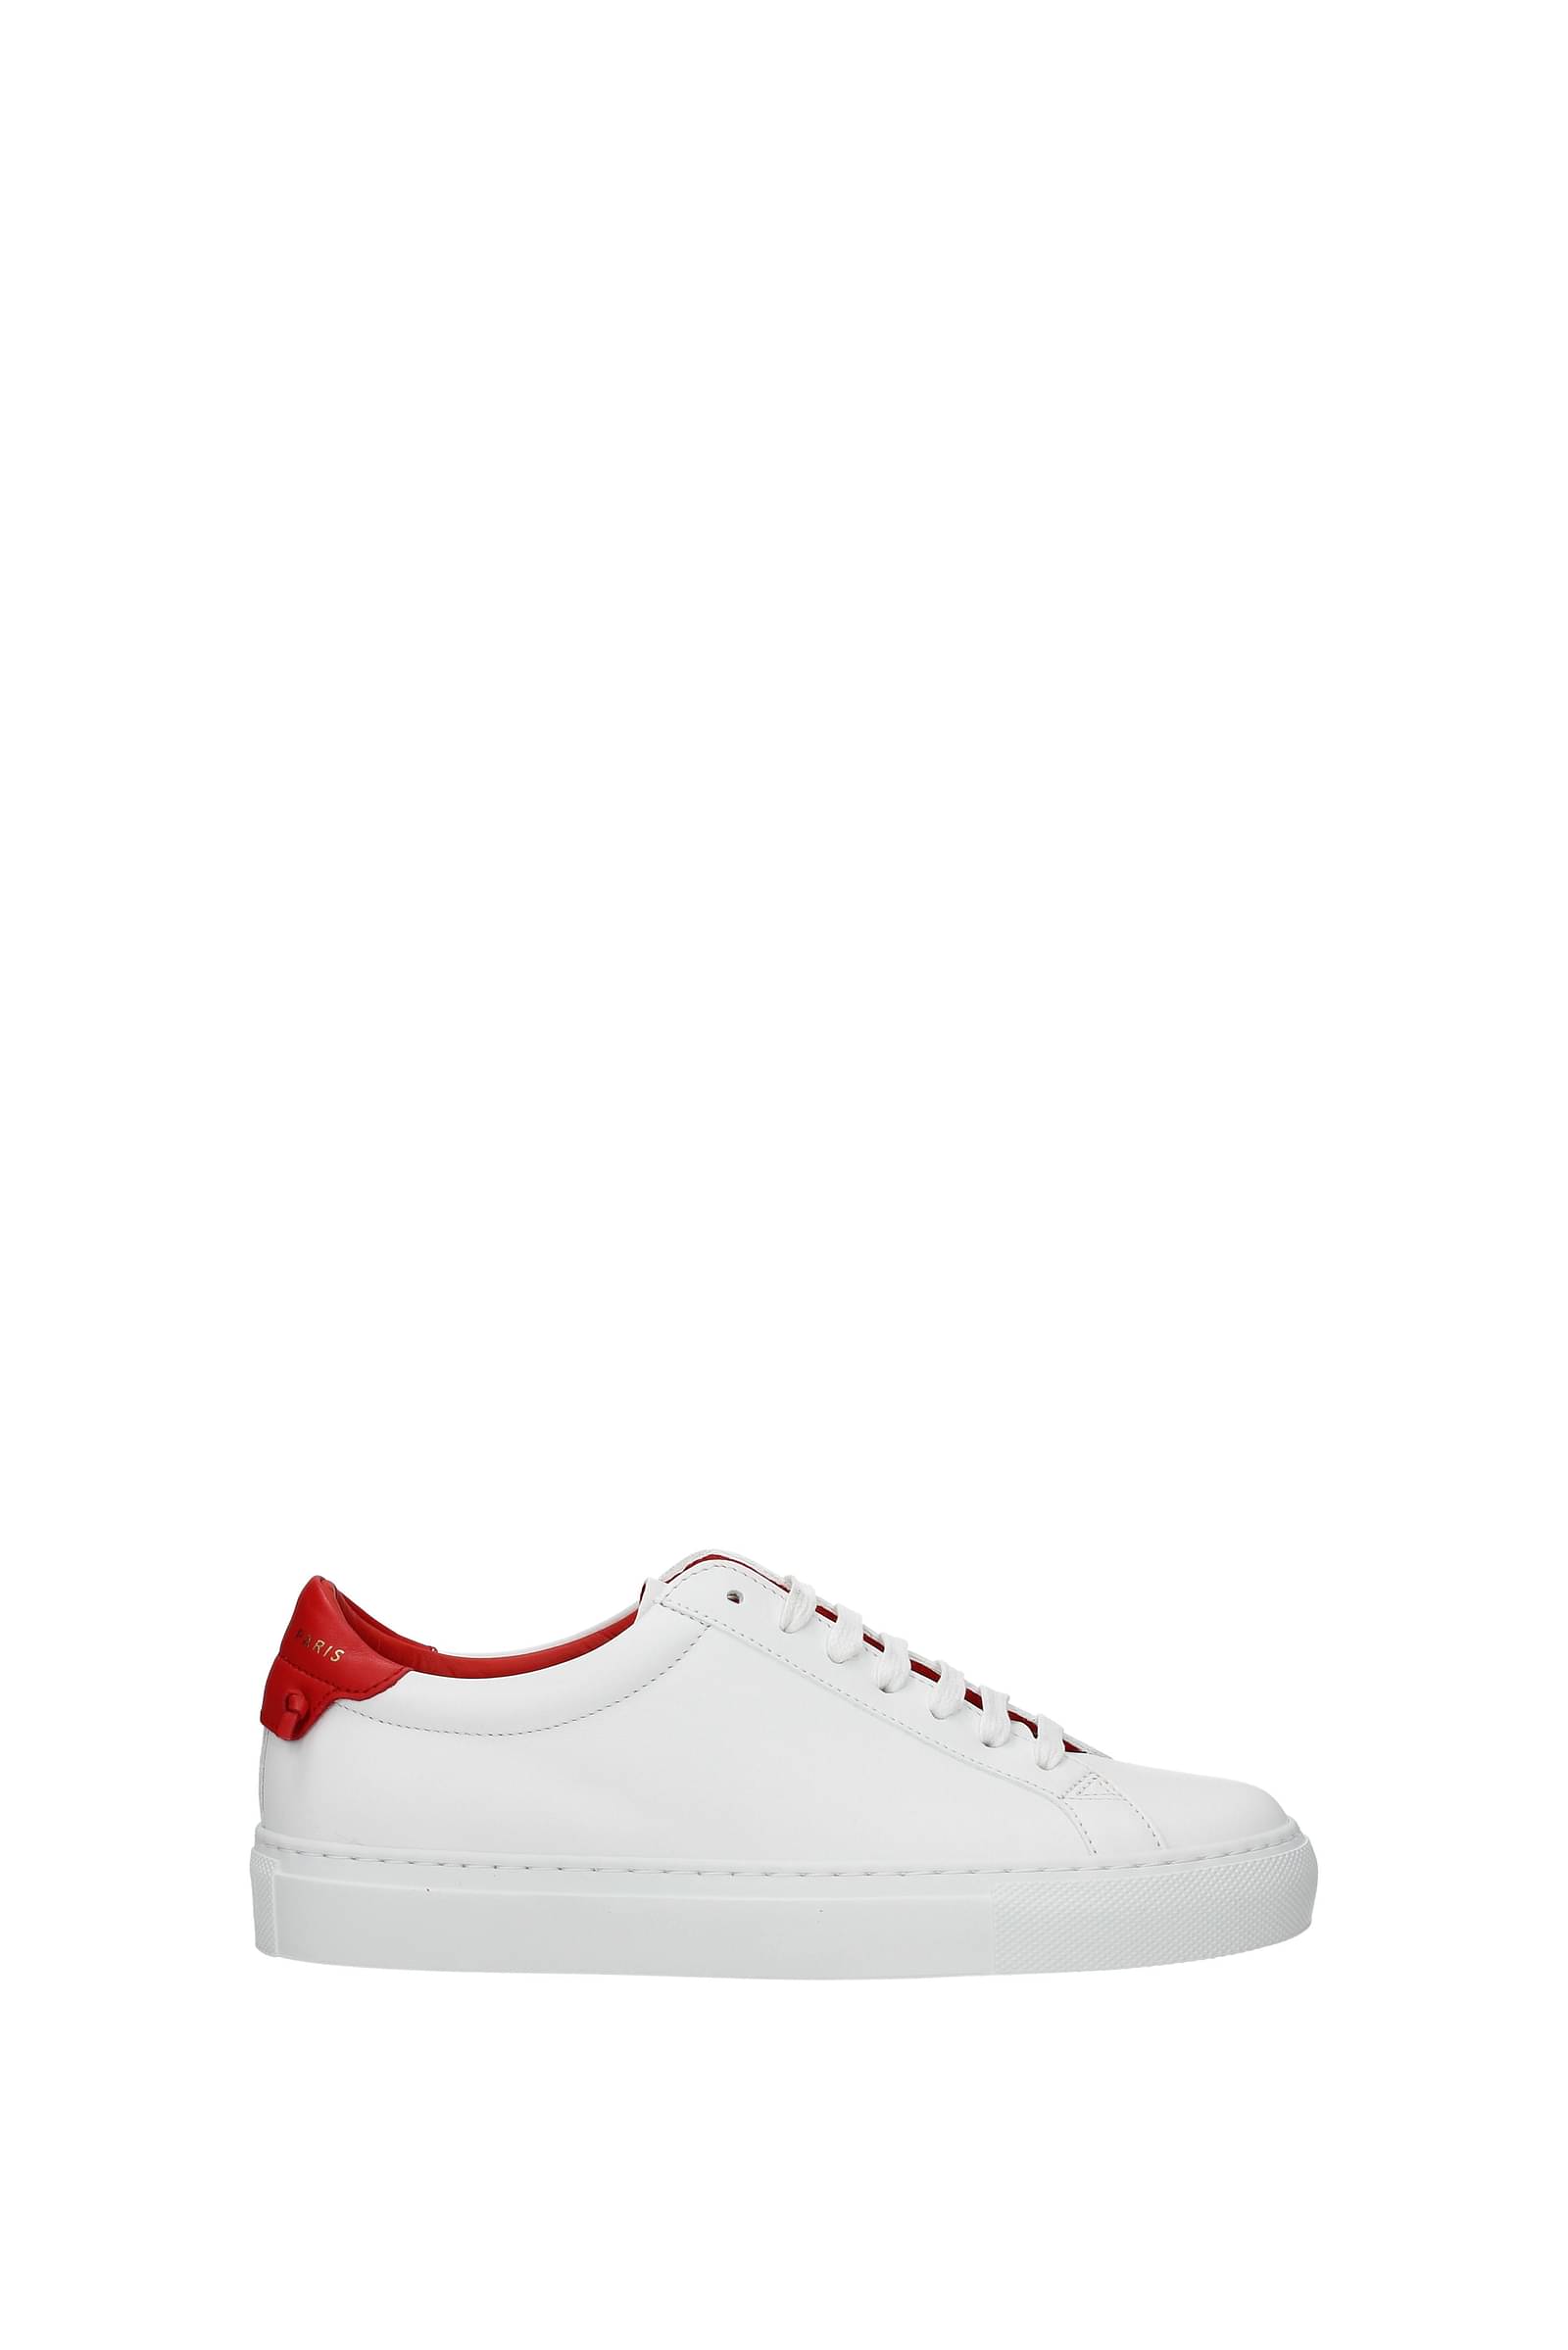 Givenchy Sneakers urban street Women BE0003E0DC112 Leather 340€